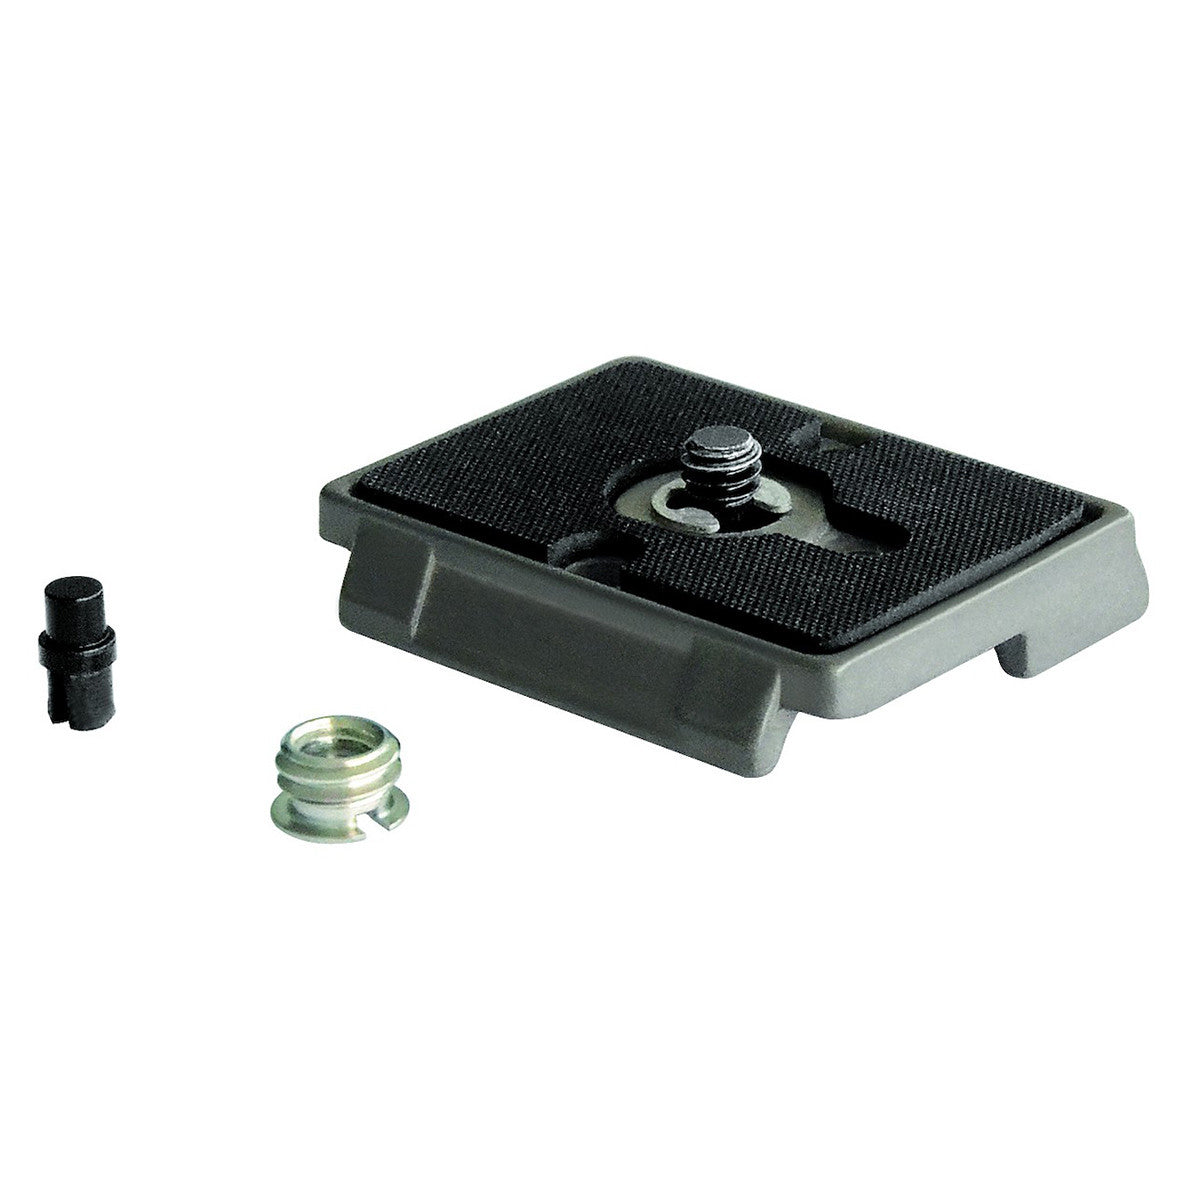 Manfrotto 200PL Quick Release Plate in Manfrotto 200PL Quick Release Plate - goHUNT Shop by GOHUNT | Manfrotto - GOHUNT Shop